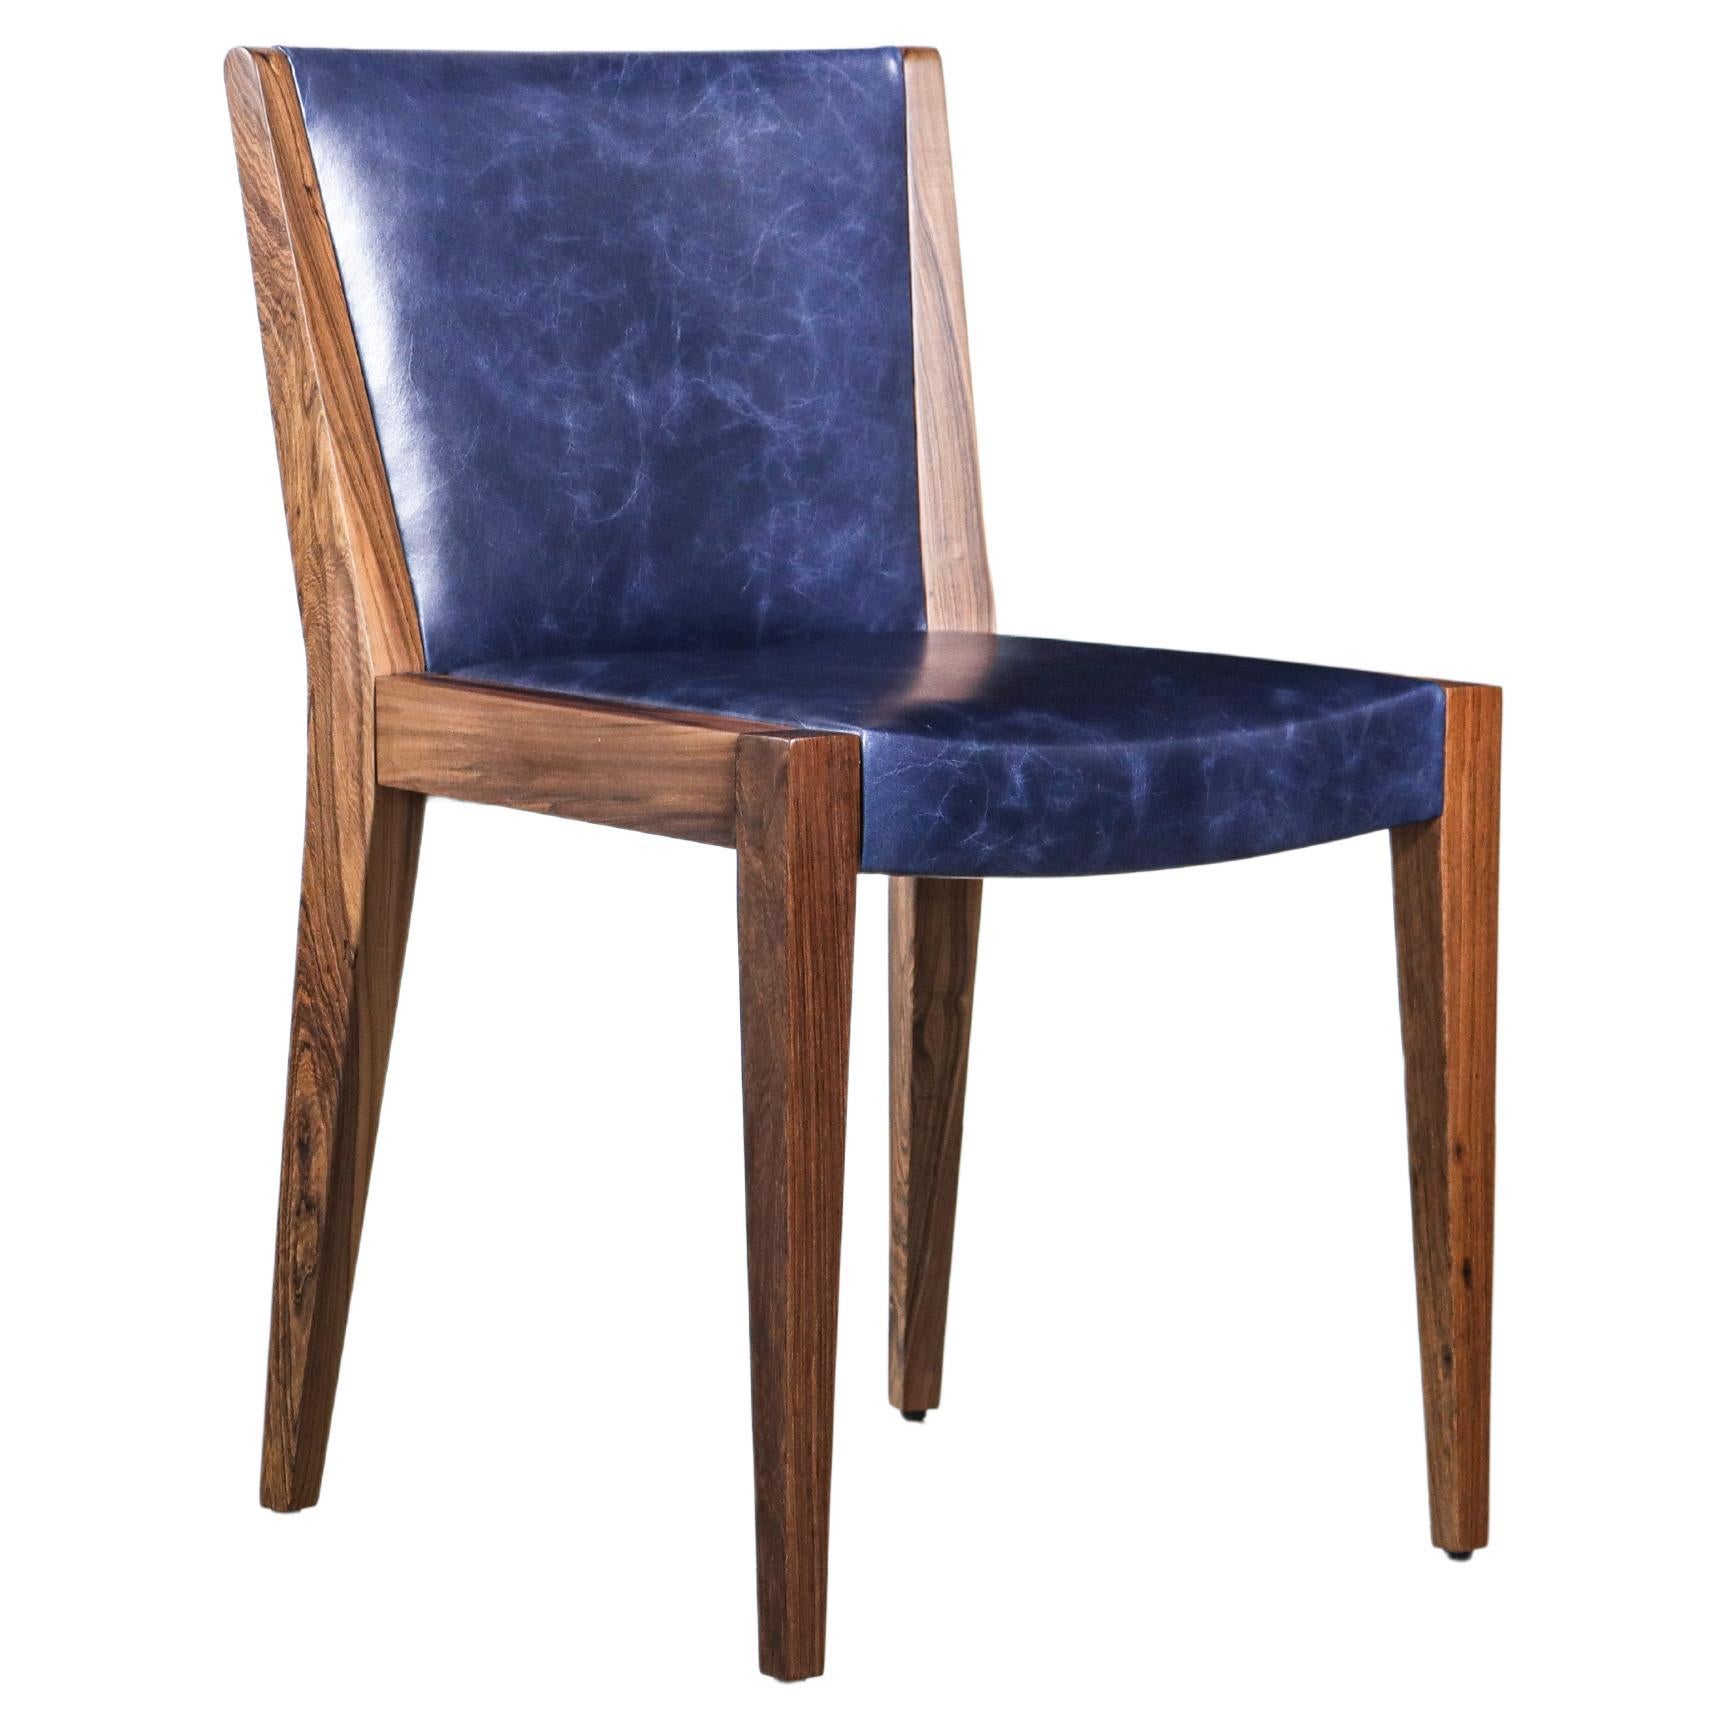 Modern Exotic Wood and Wrapped Leather Dining Chair from Costantini, Giovanni For Sale